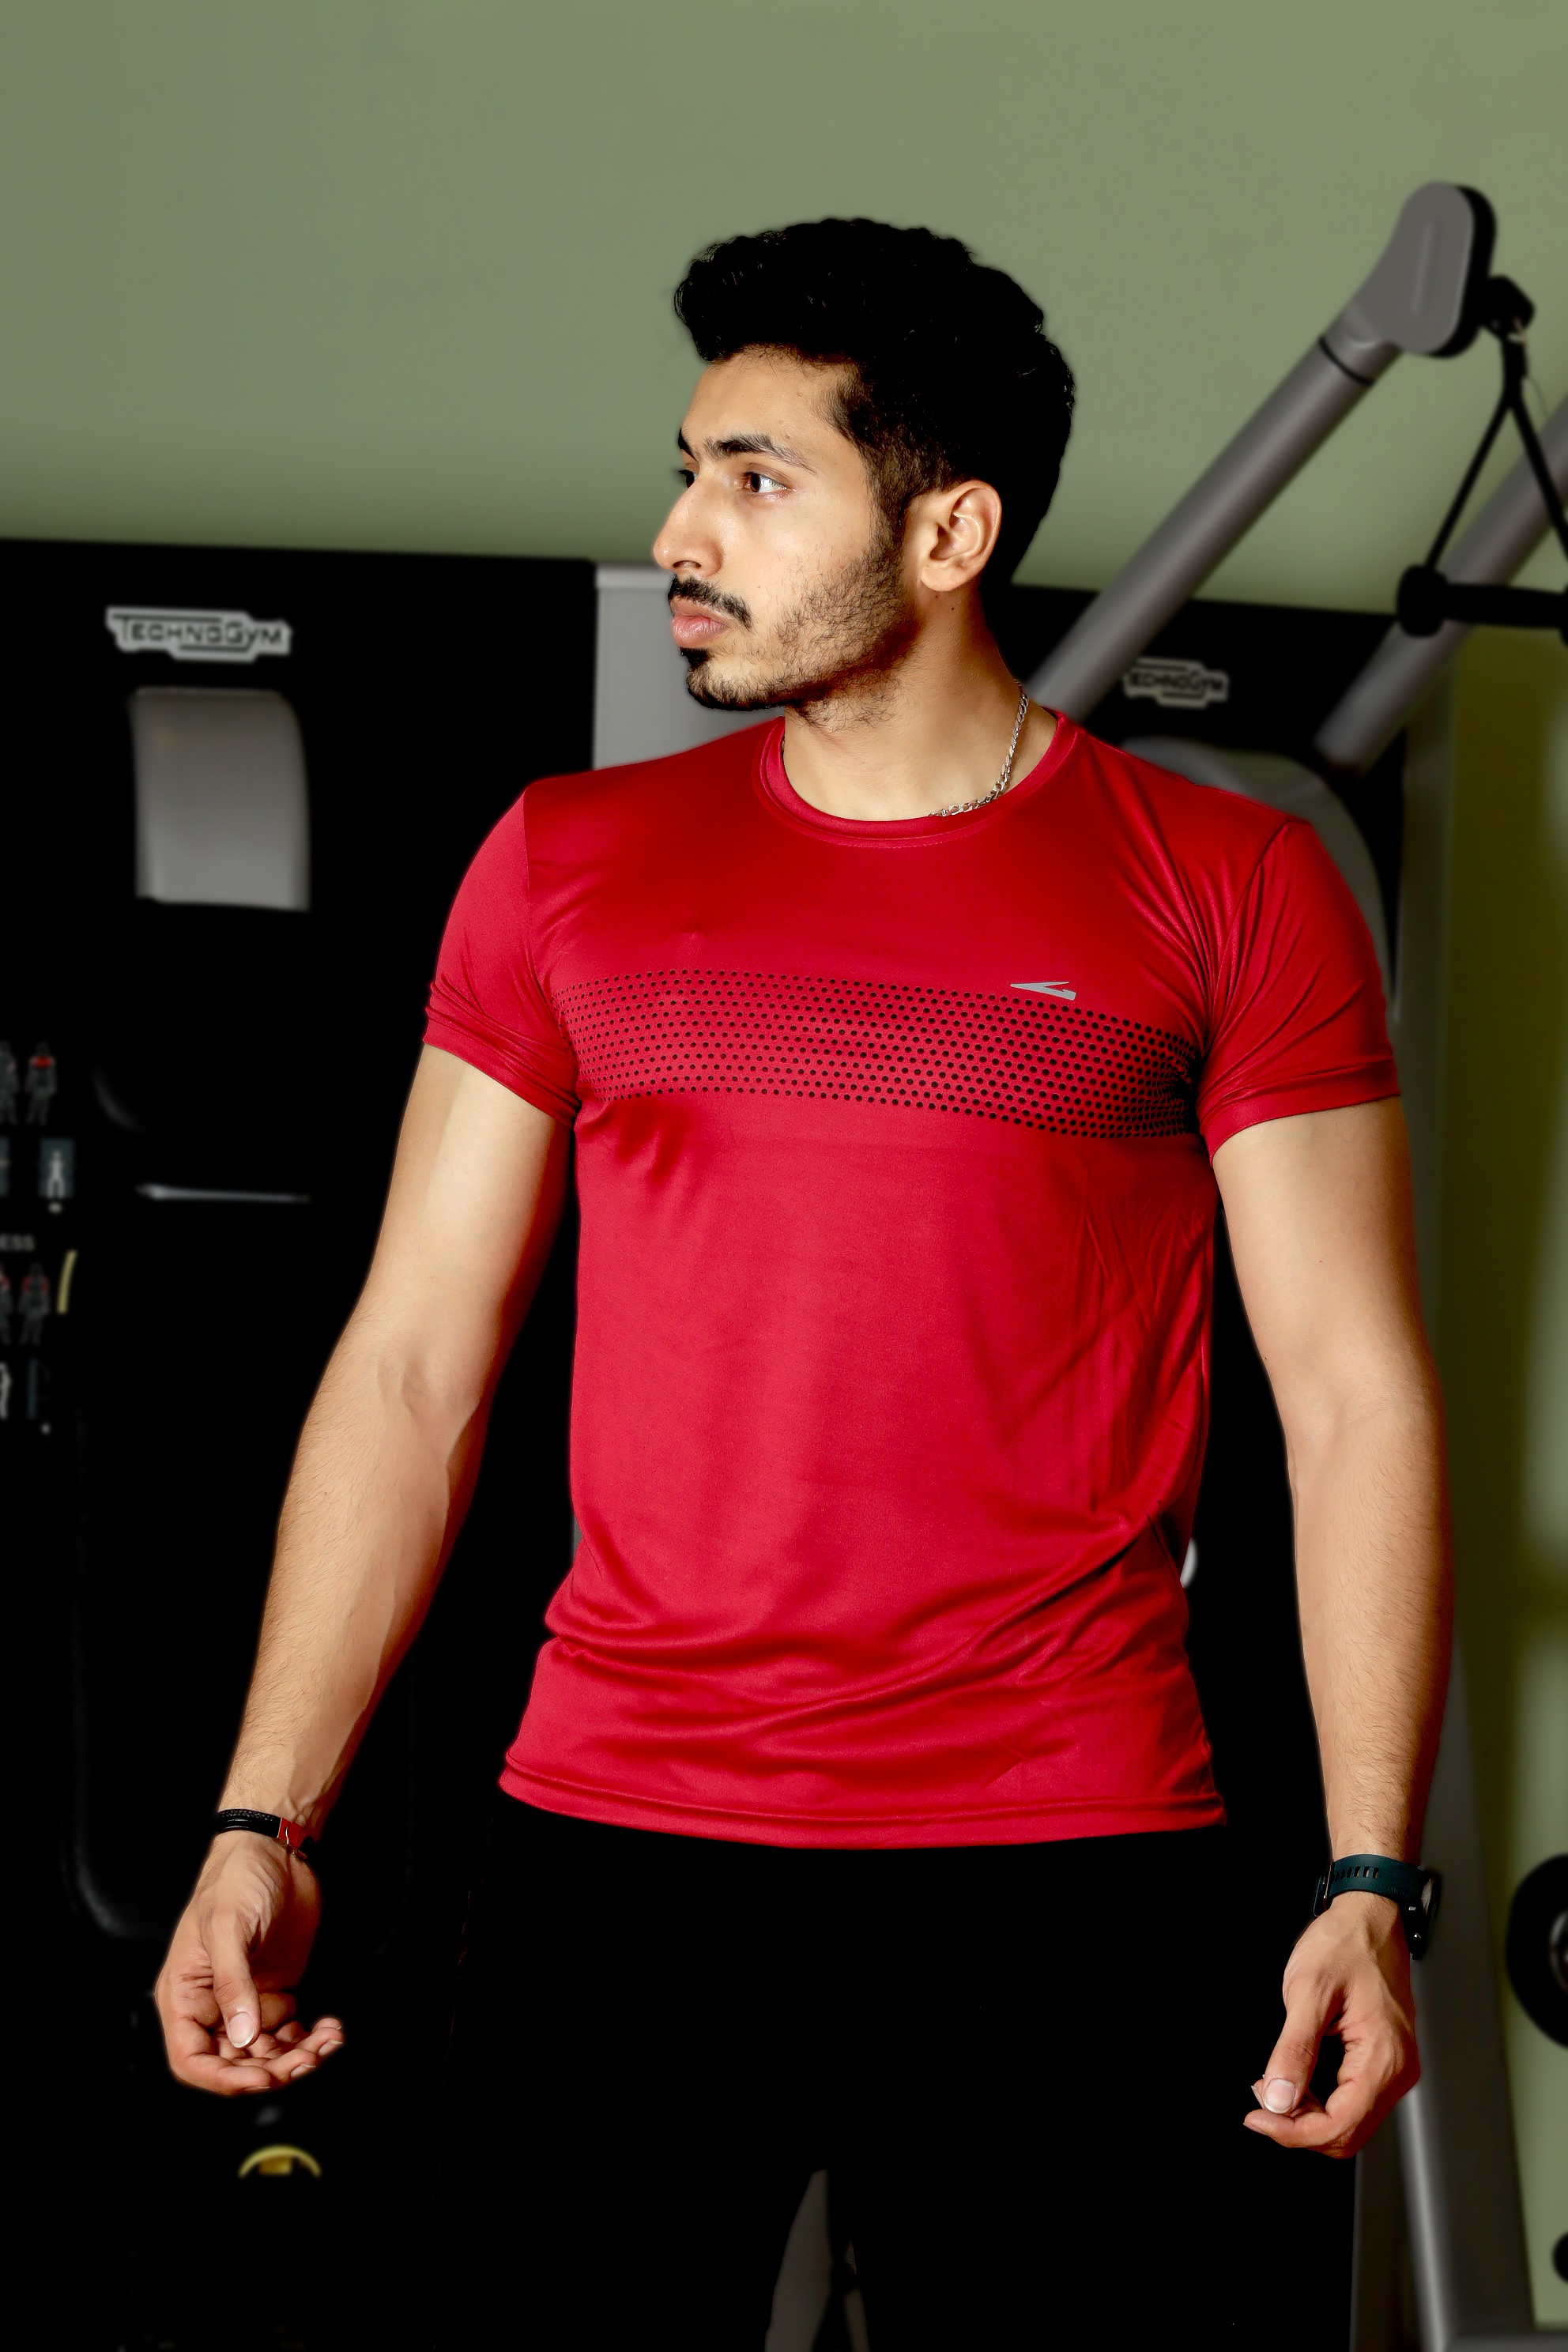 Minora Sport T-shirt for Men Active Quick Dry Crew Neck Athletic Running Gym